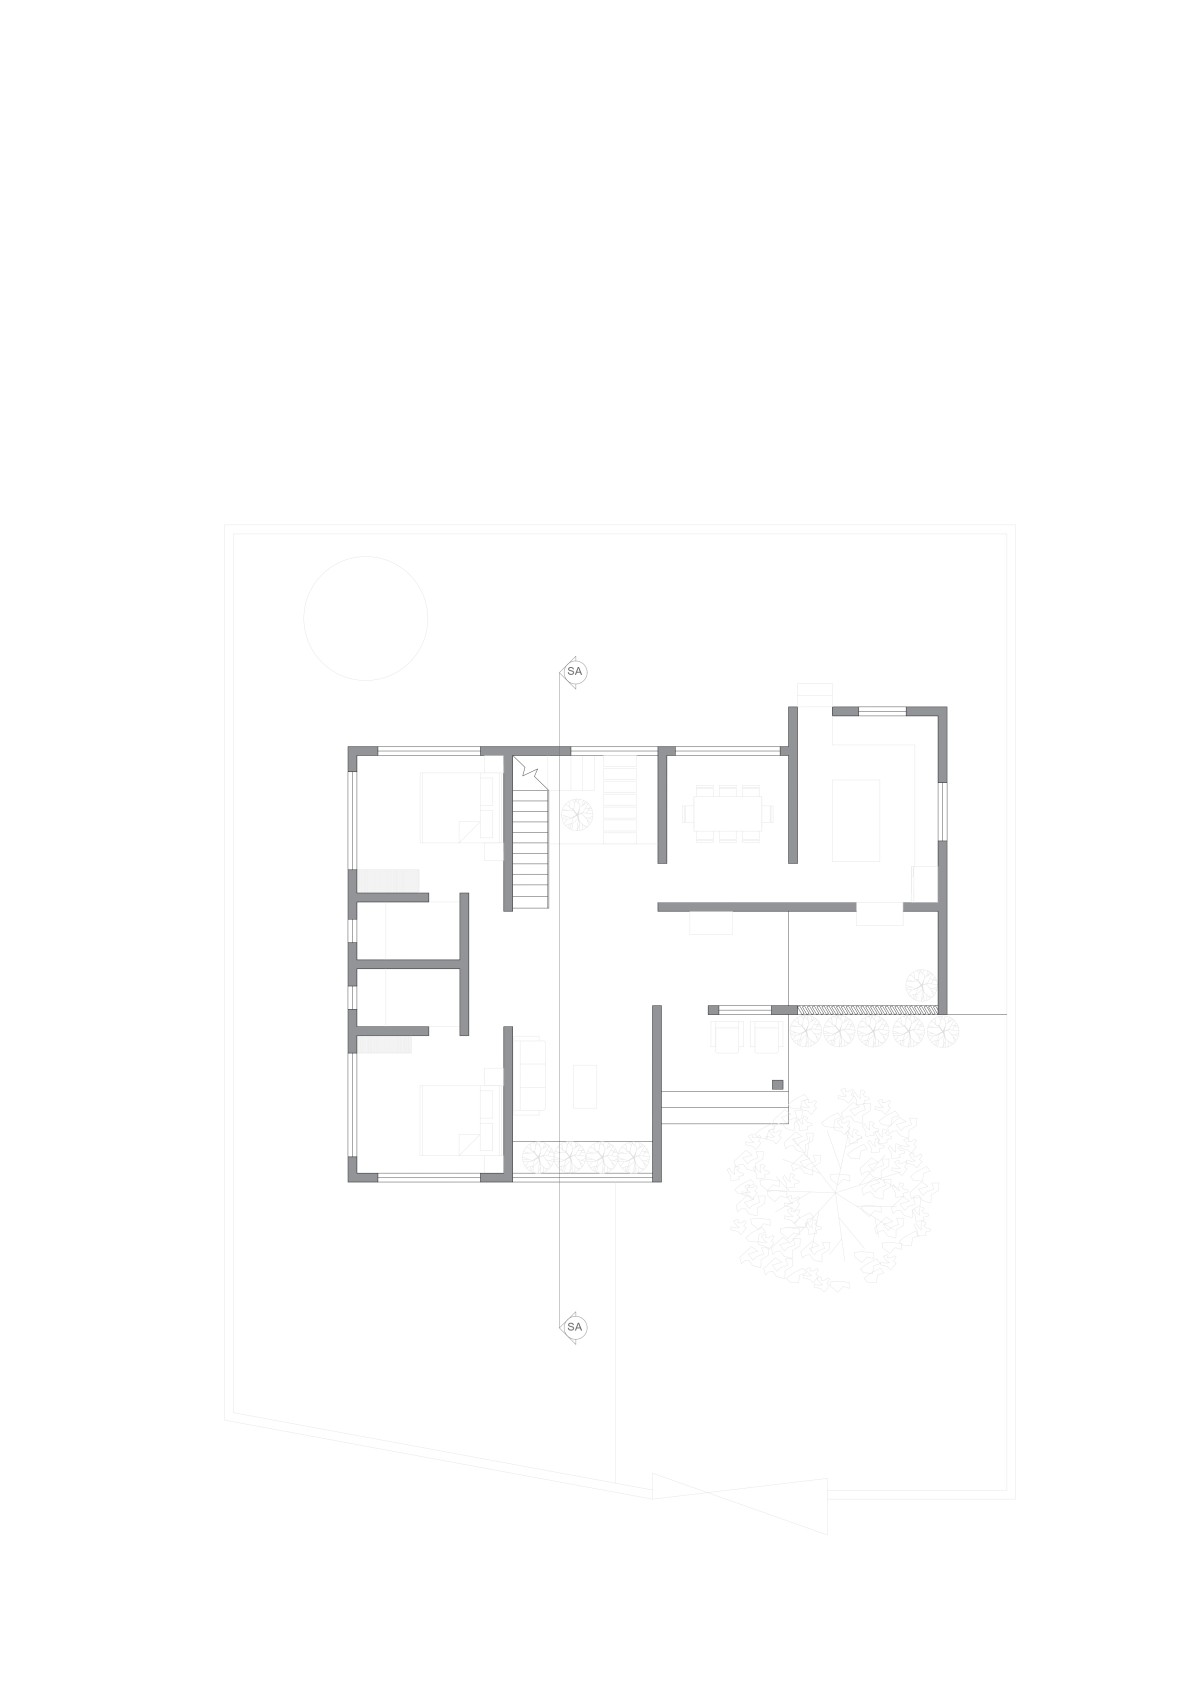 Ground floor plan of Alibhais House by Eleventh Floor Architects